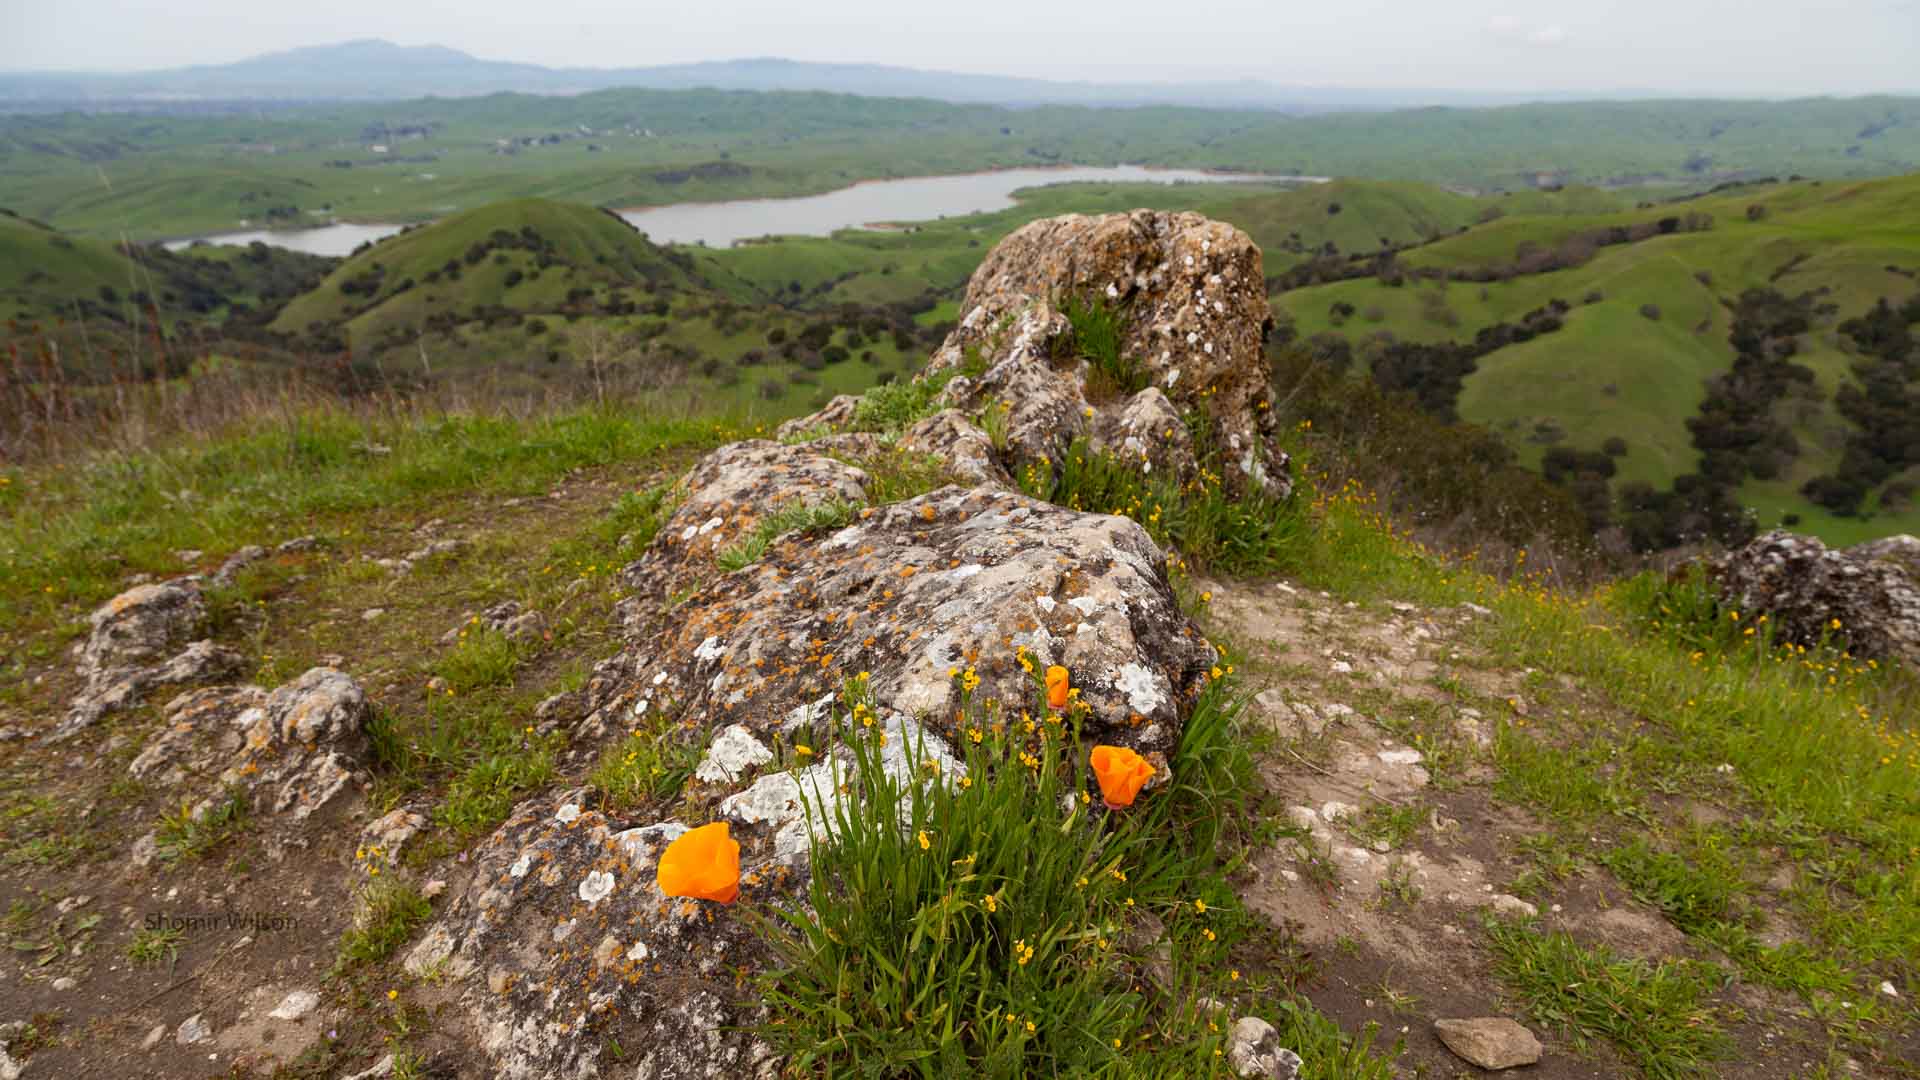 in the foreground, orange poppies around a lichen-covered stone on a hilltop; in the background, below, green rolling hills dotted with trees